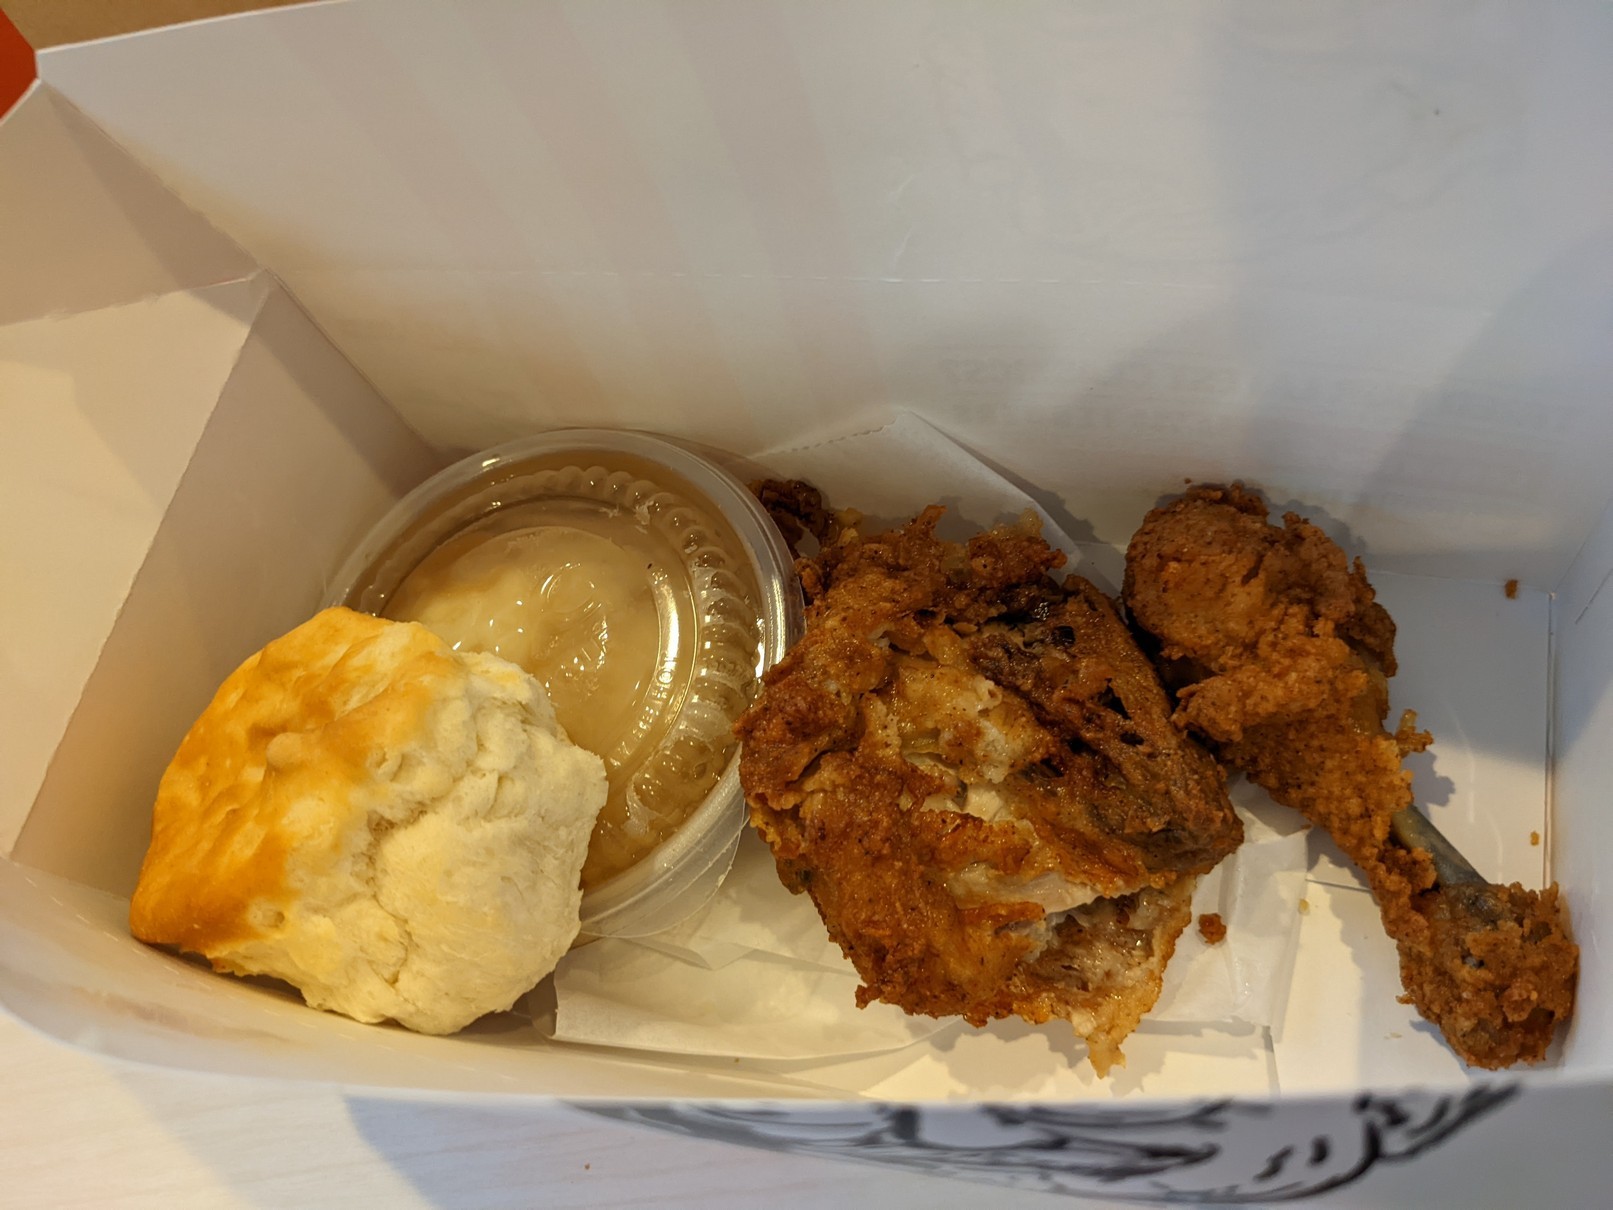 The KFC two piece dark meat meal, with a thigh, drumstick, biscuit, and mashed potatoes.